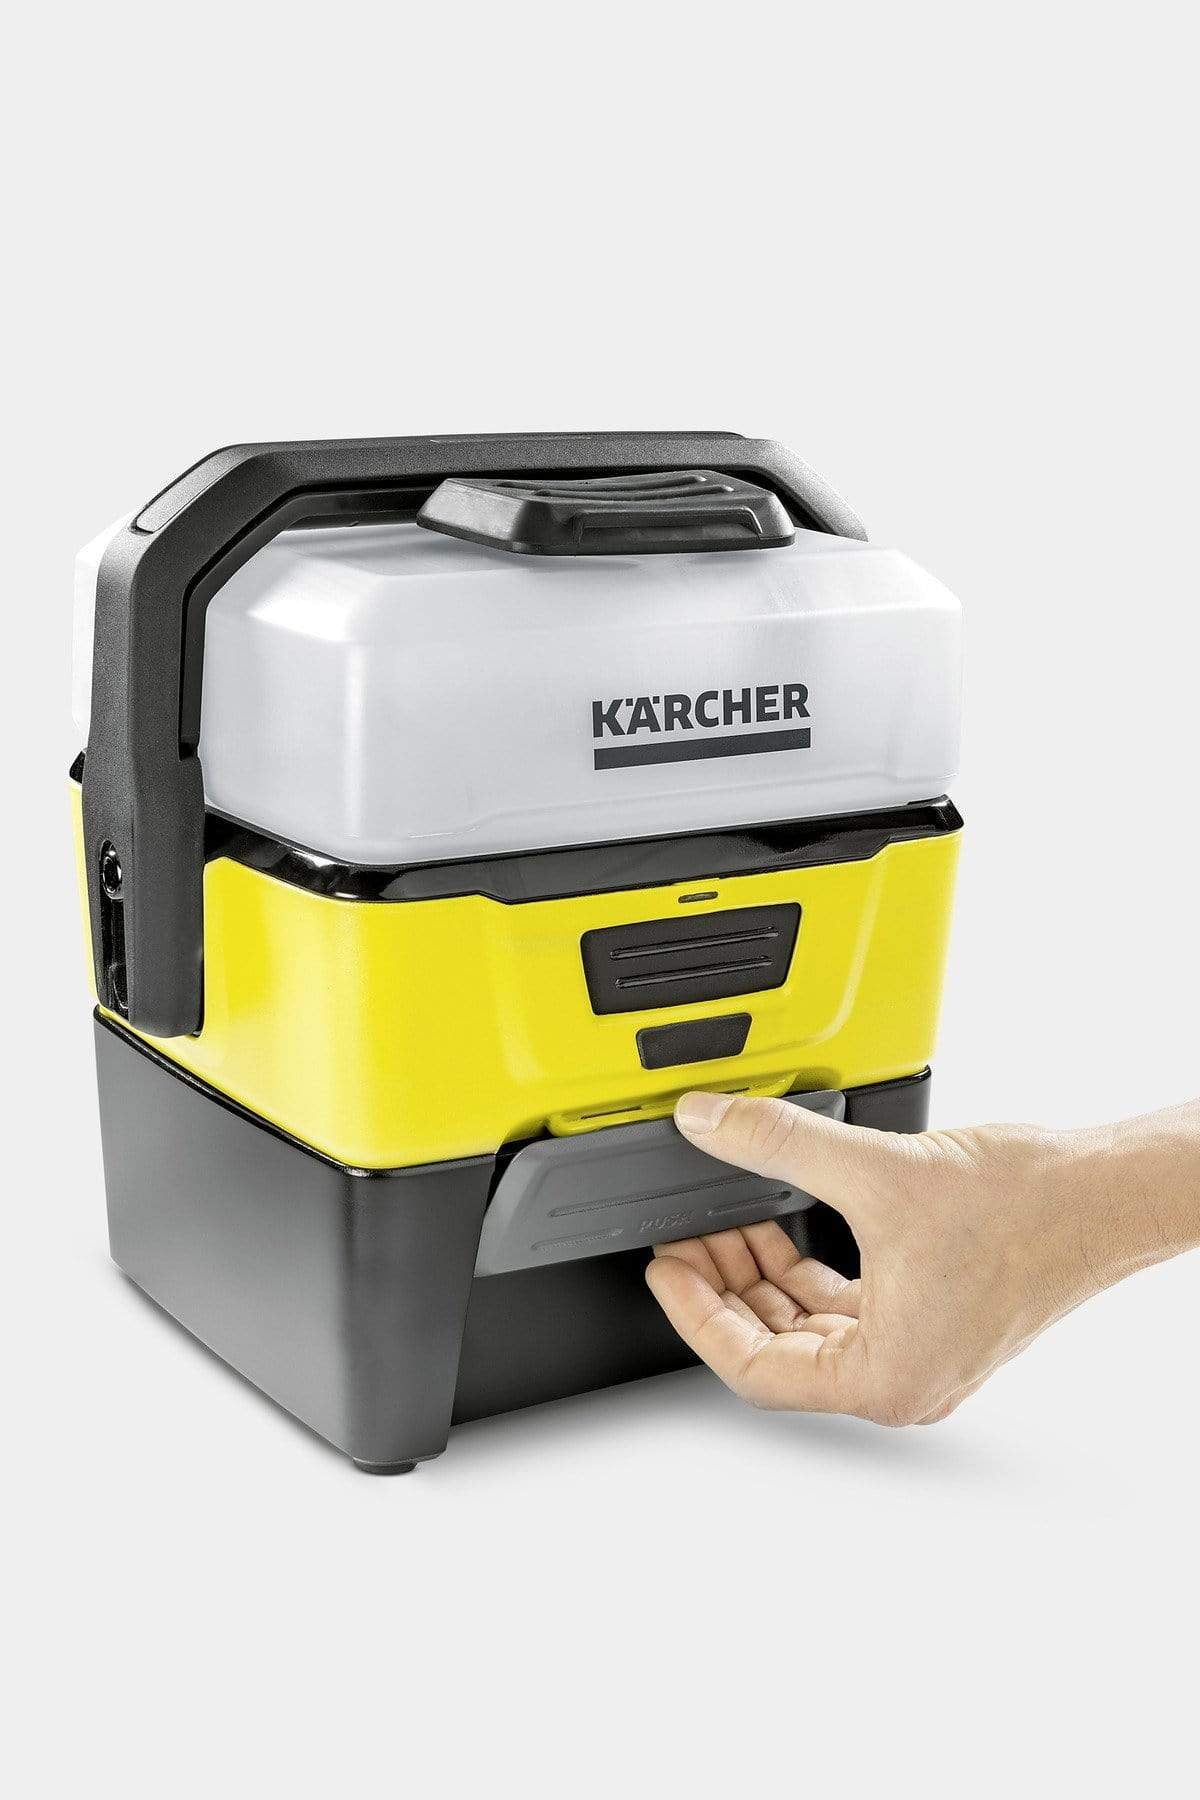 Karcher Mobile Outdoor Cleaner OC 3 + Adventure Box 5 Bar | Supply Master | Accra, Ghana Tools Building Steel Engineering Hardware tool